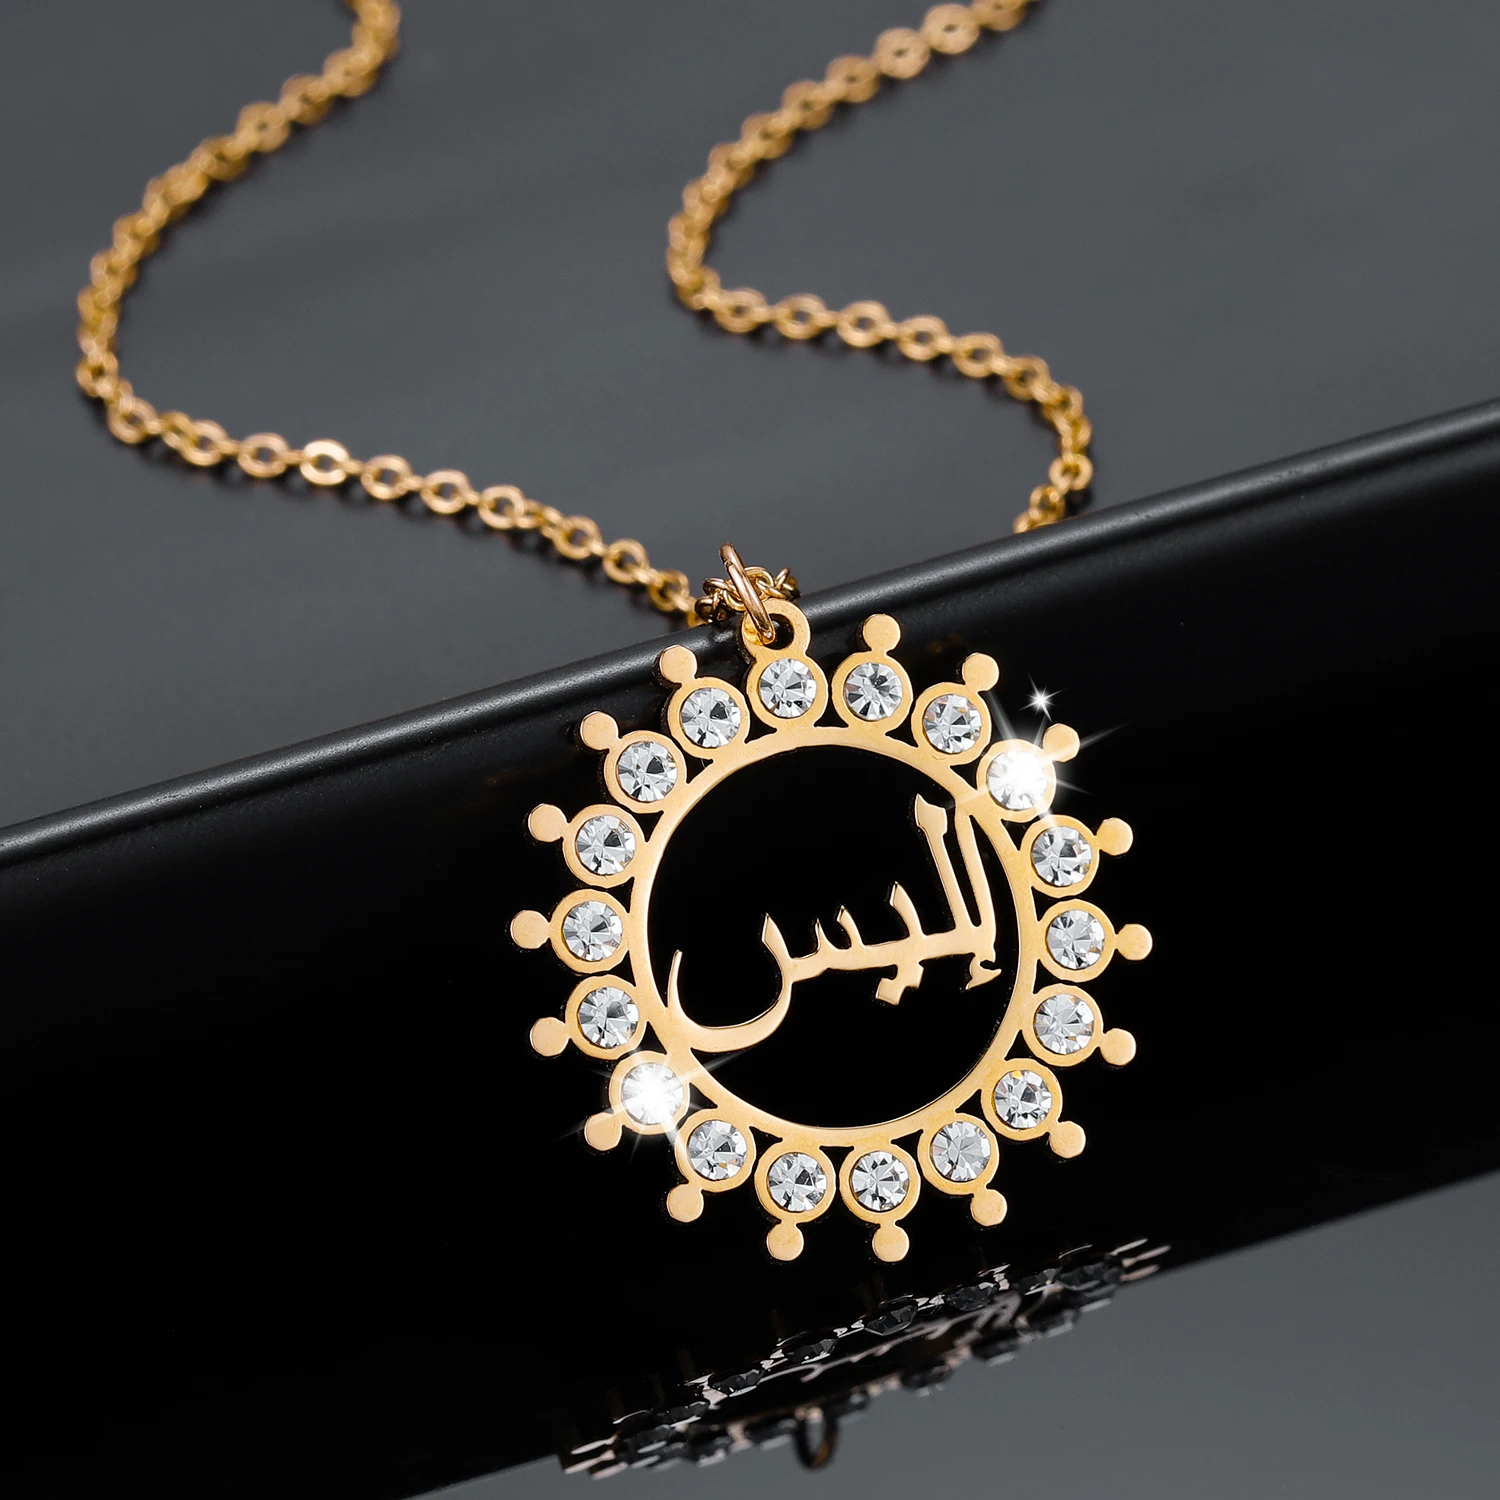 Customized Arabic Gold Name Necklace Personalized Name Pendant  for Women Islamic Muslim Round Choker Diamond Jewelry Gifts